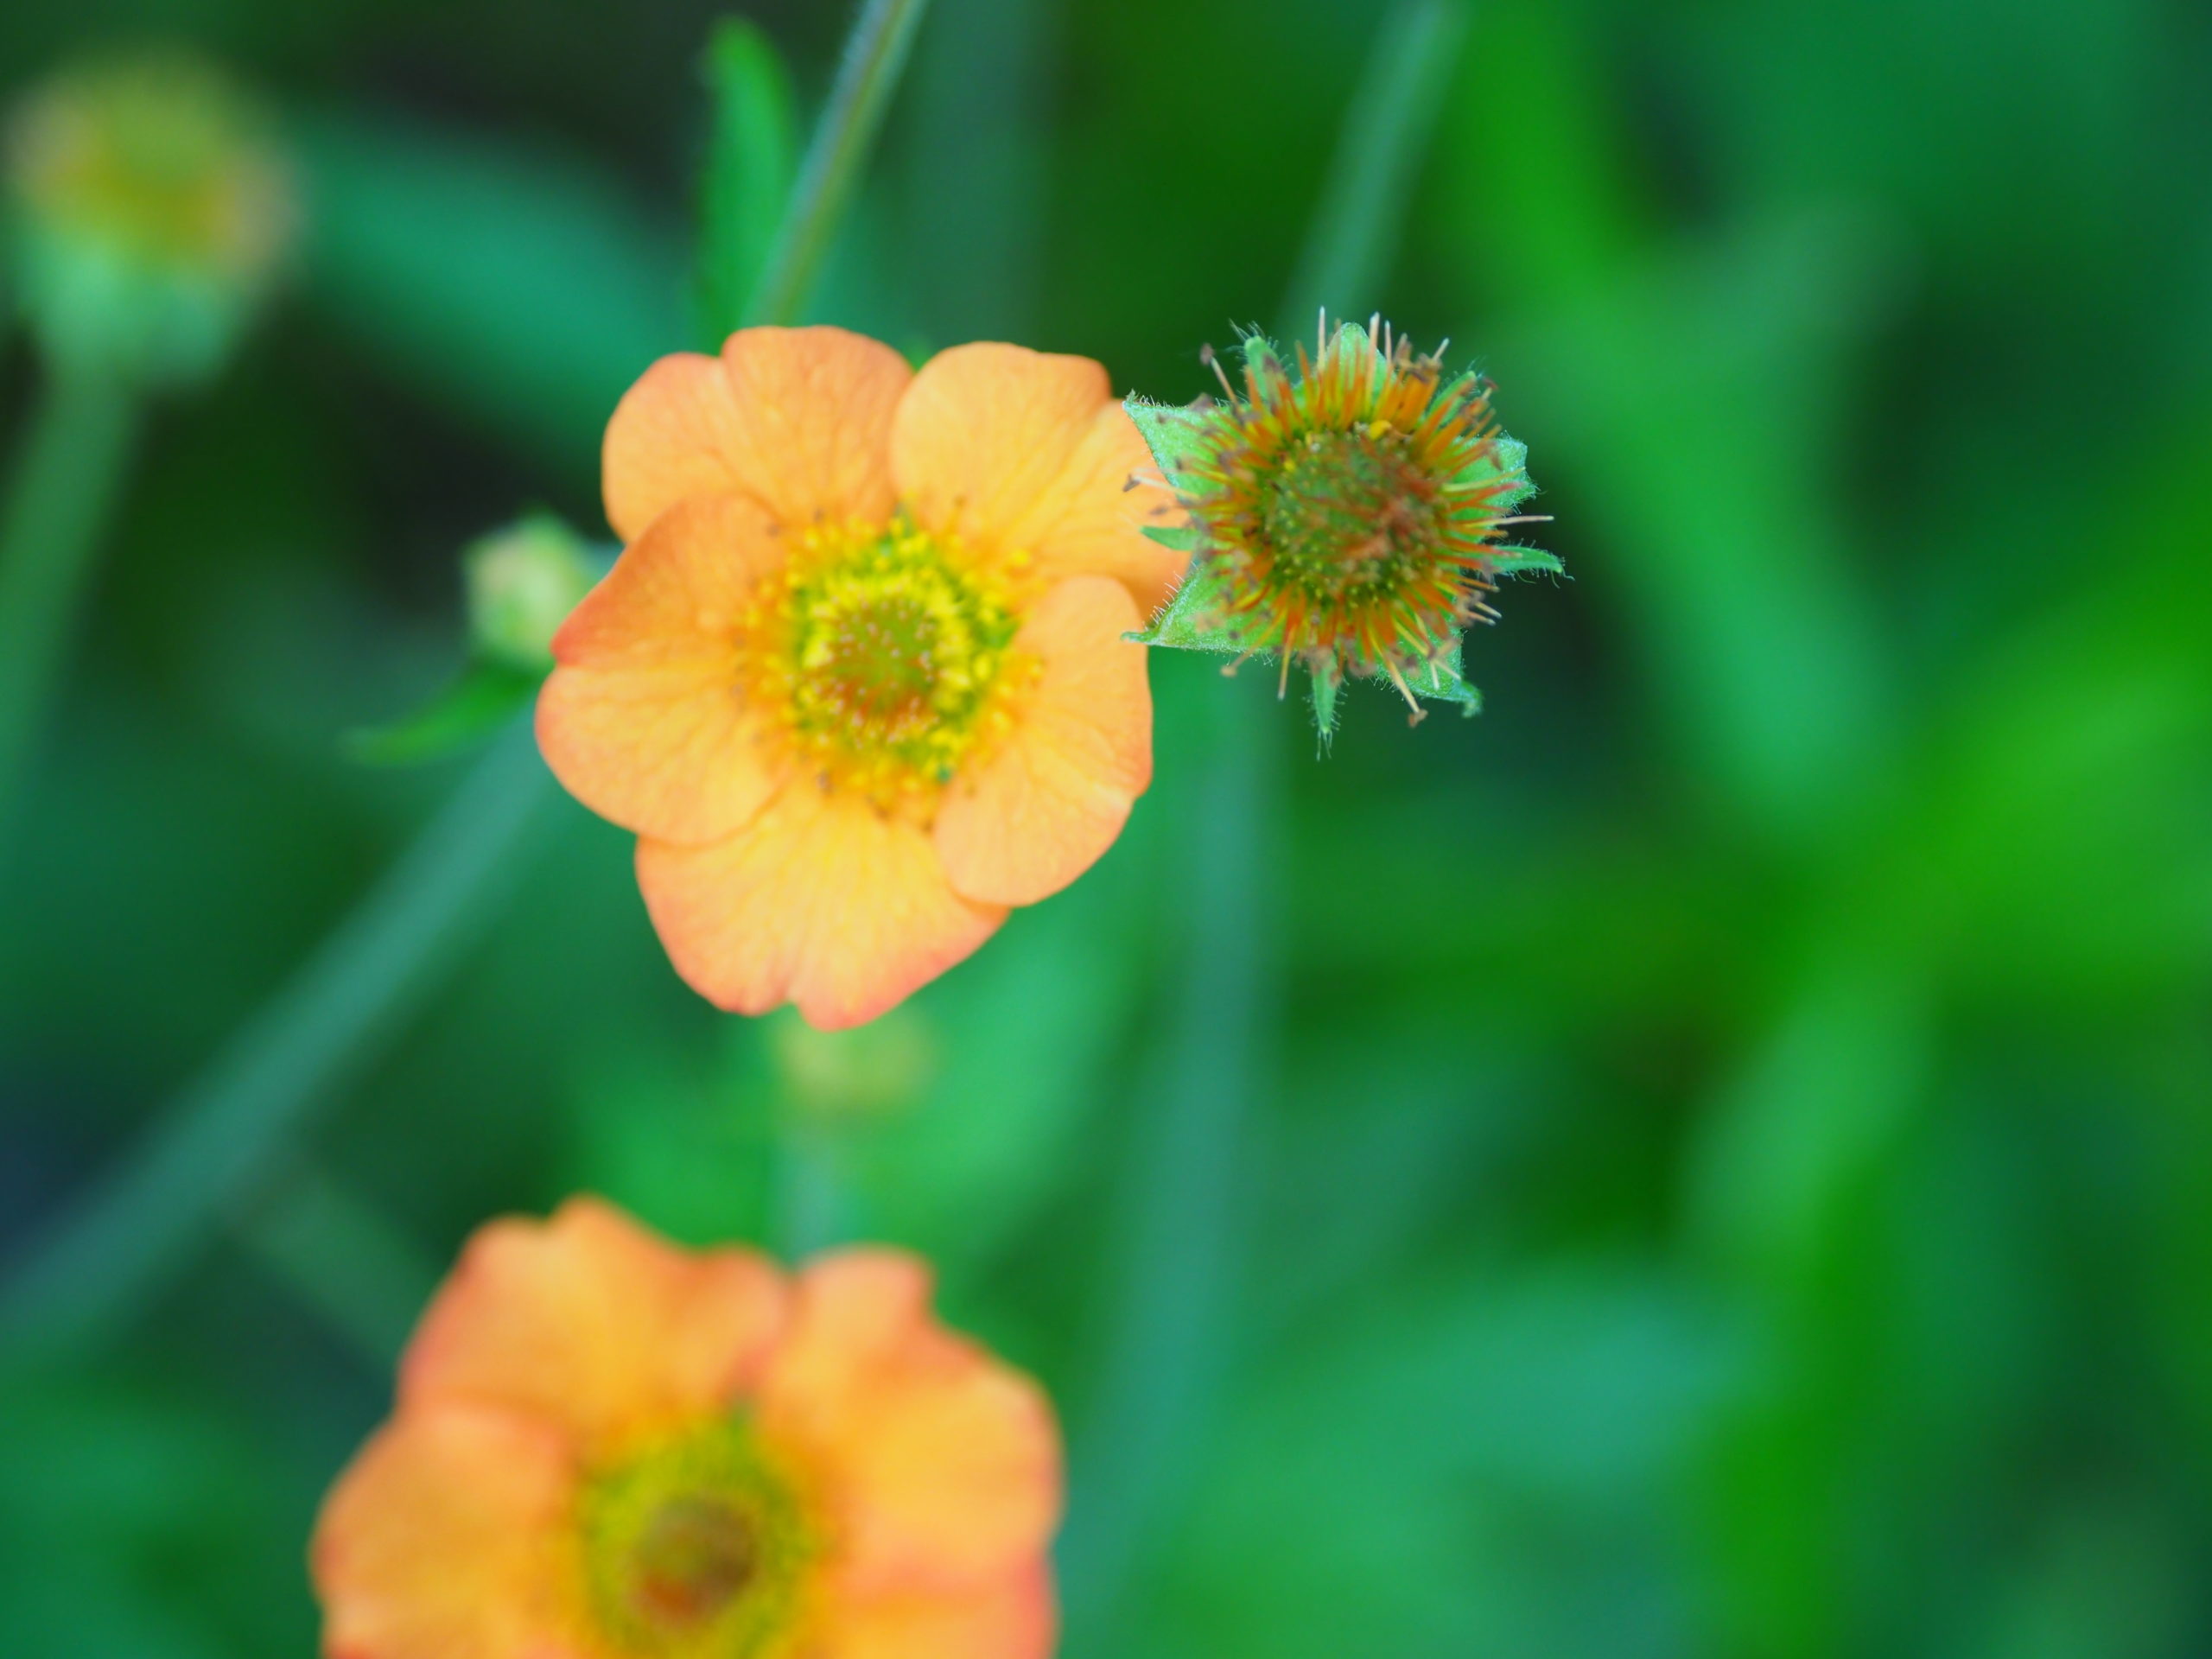 The flower of Geum 